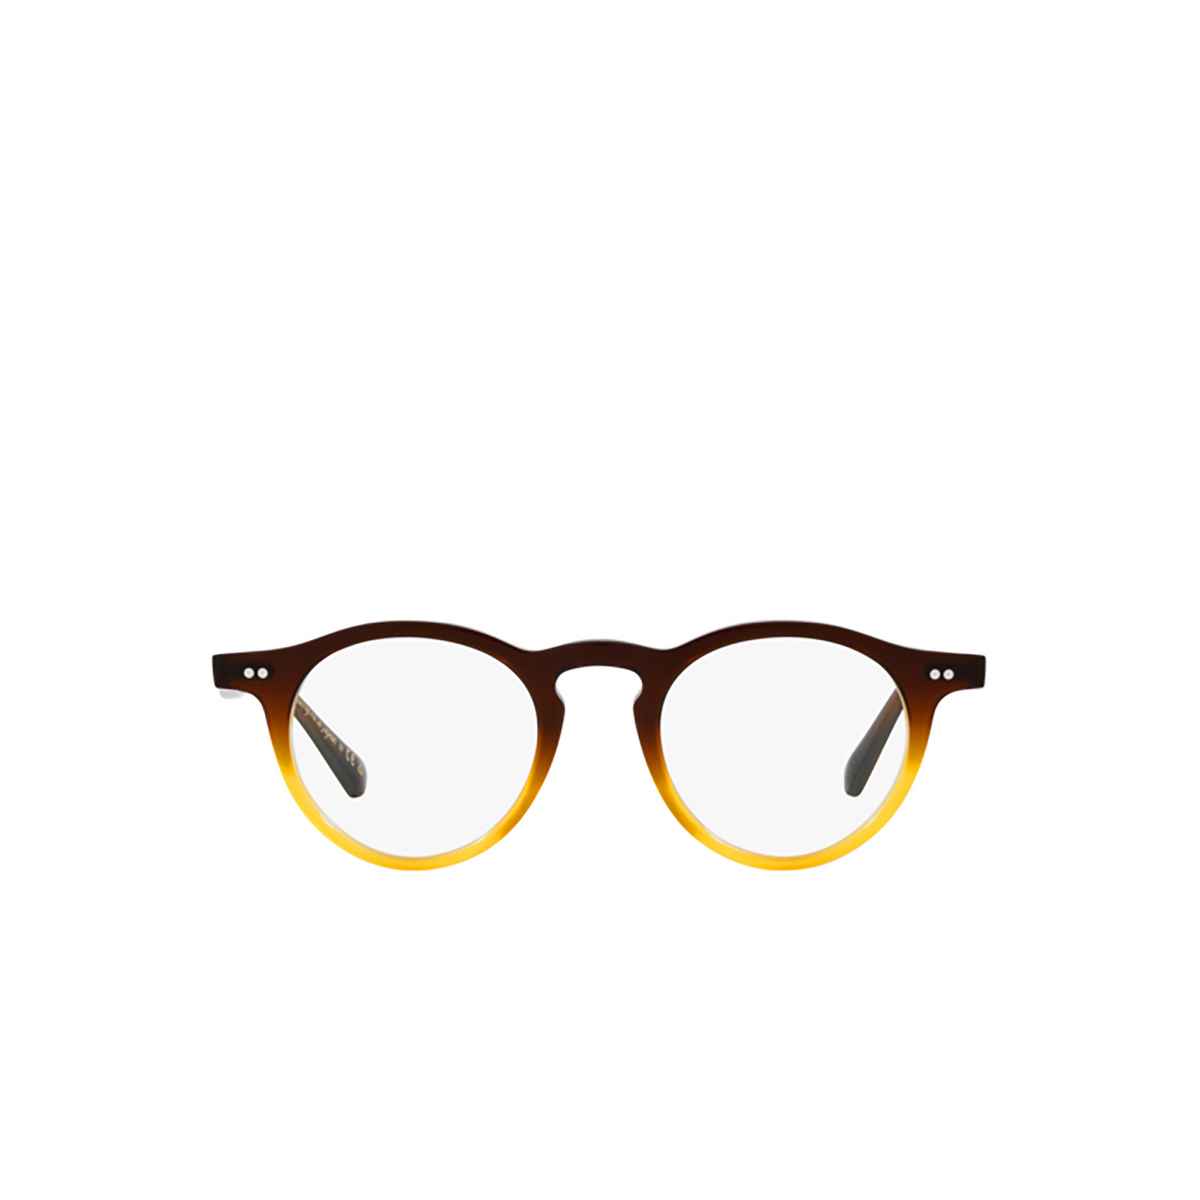 Oliver Peoples OP-13 Eyeglasses 1746 Whisky Gradient - front view